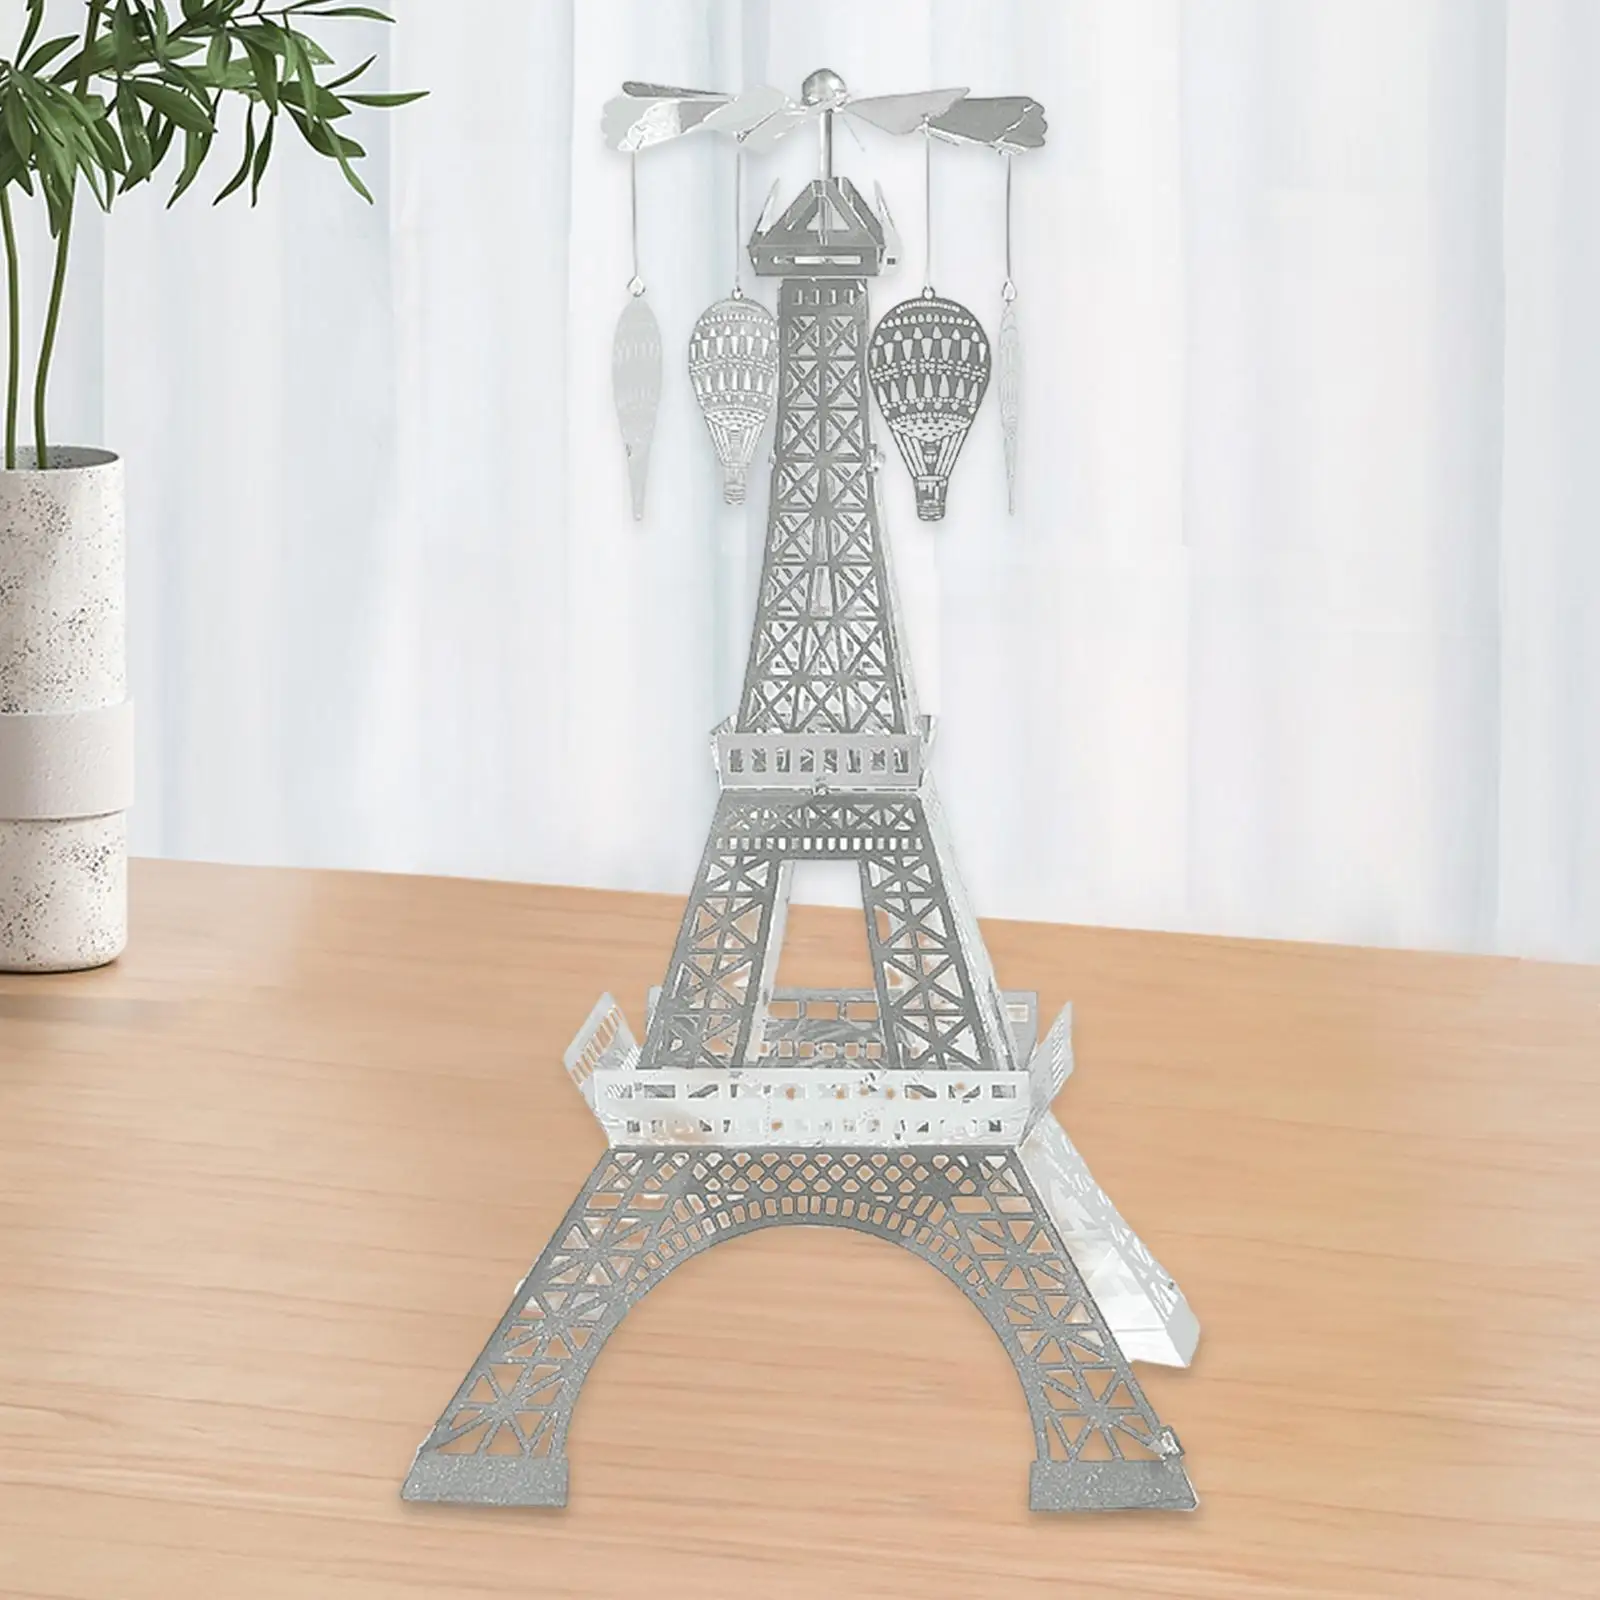 Eiffel Tower Sculptures Candle Holder Table Crafts Adornment Lovely Decor for Romantic Wedding, Christmas Party